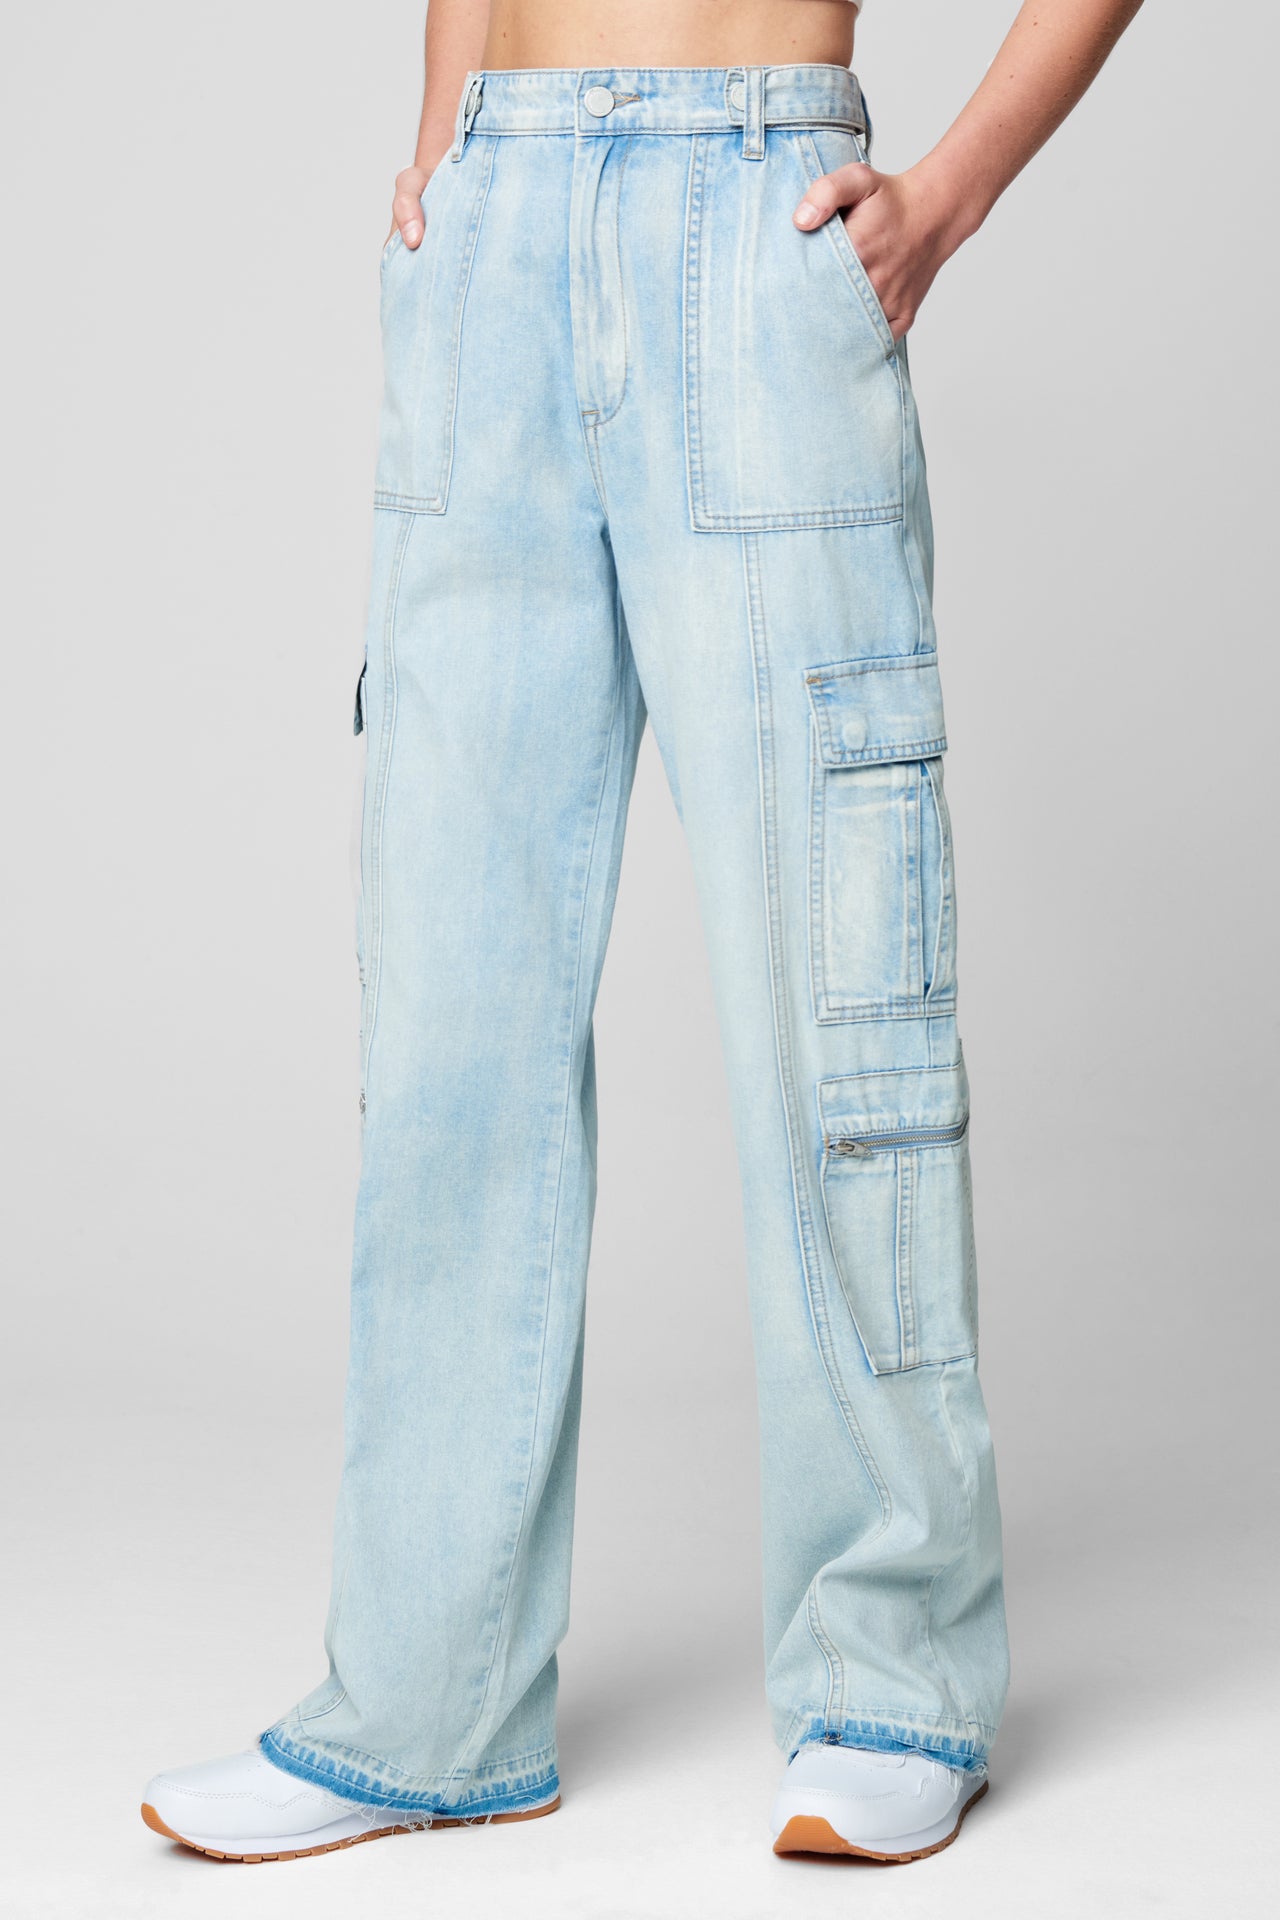 Call My Name | Pants Blue Boutique LIT Cargo